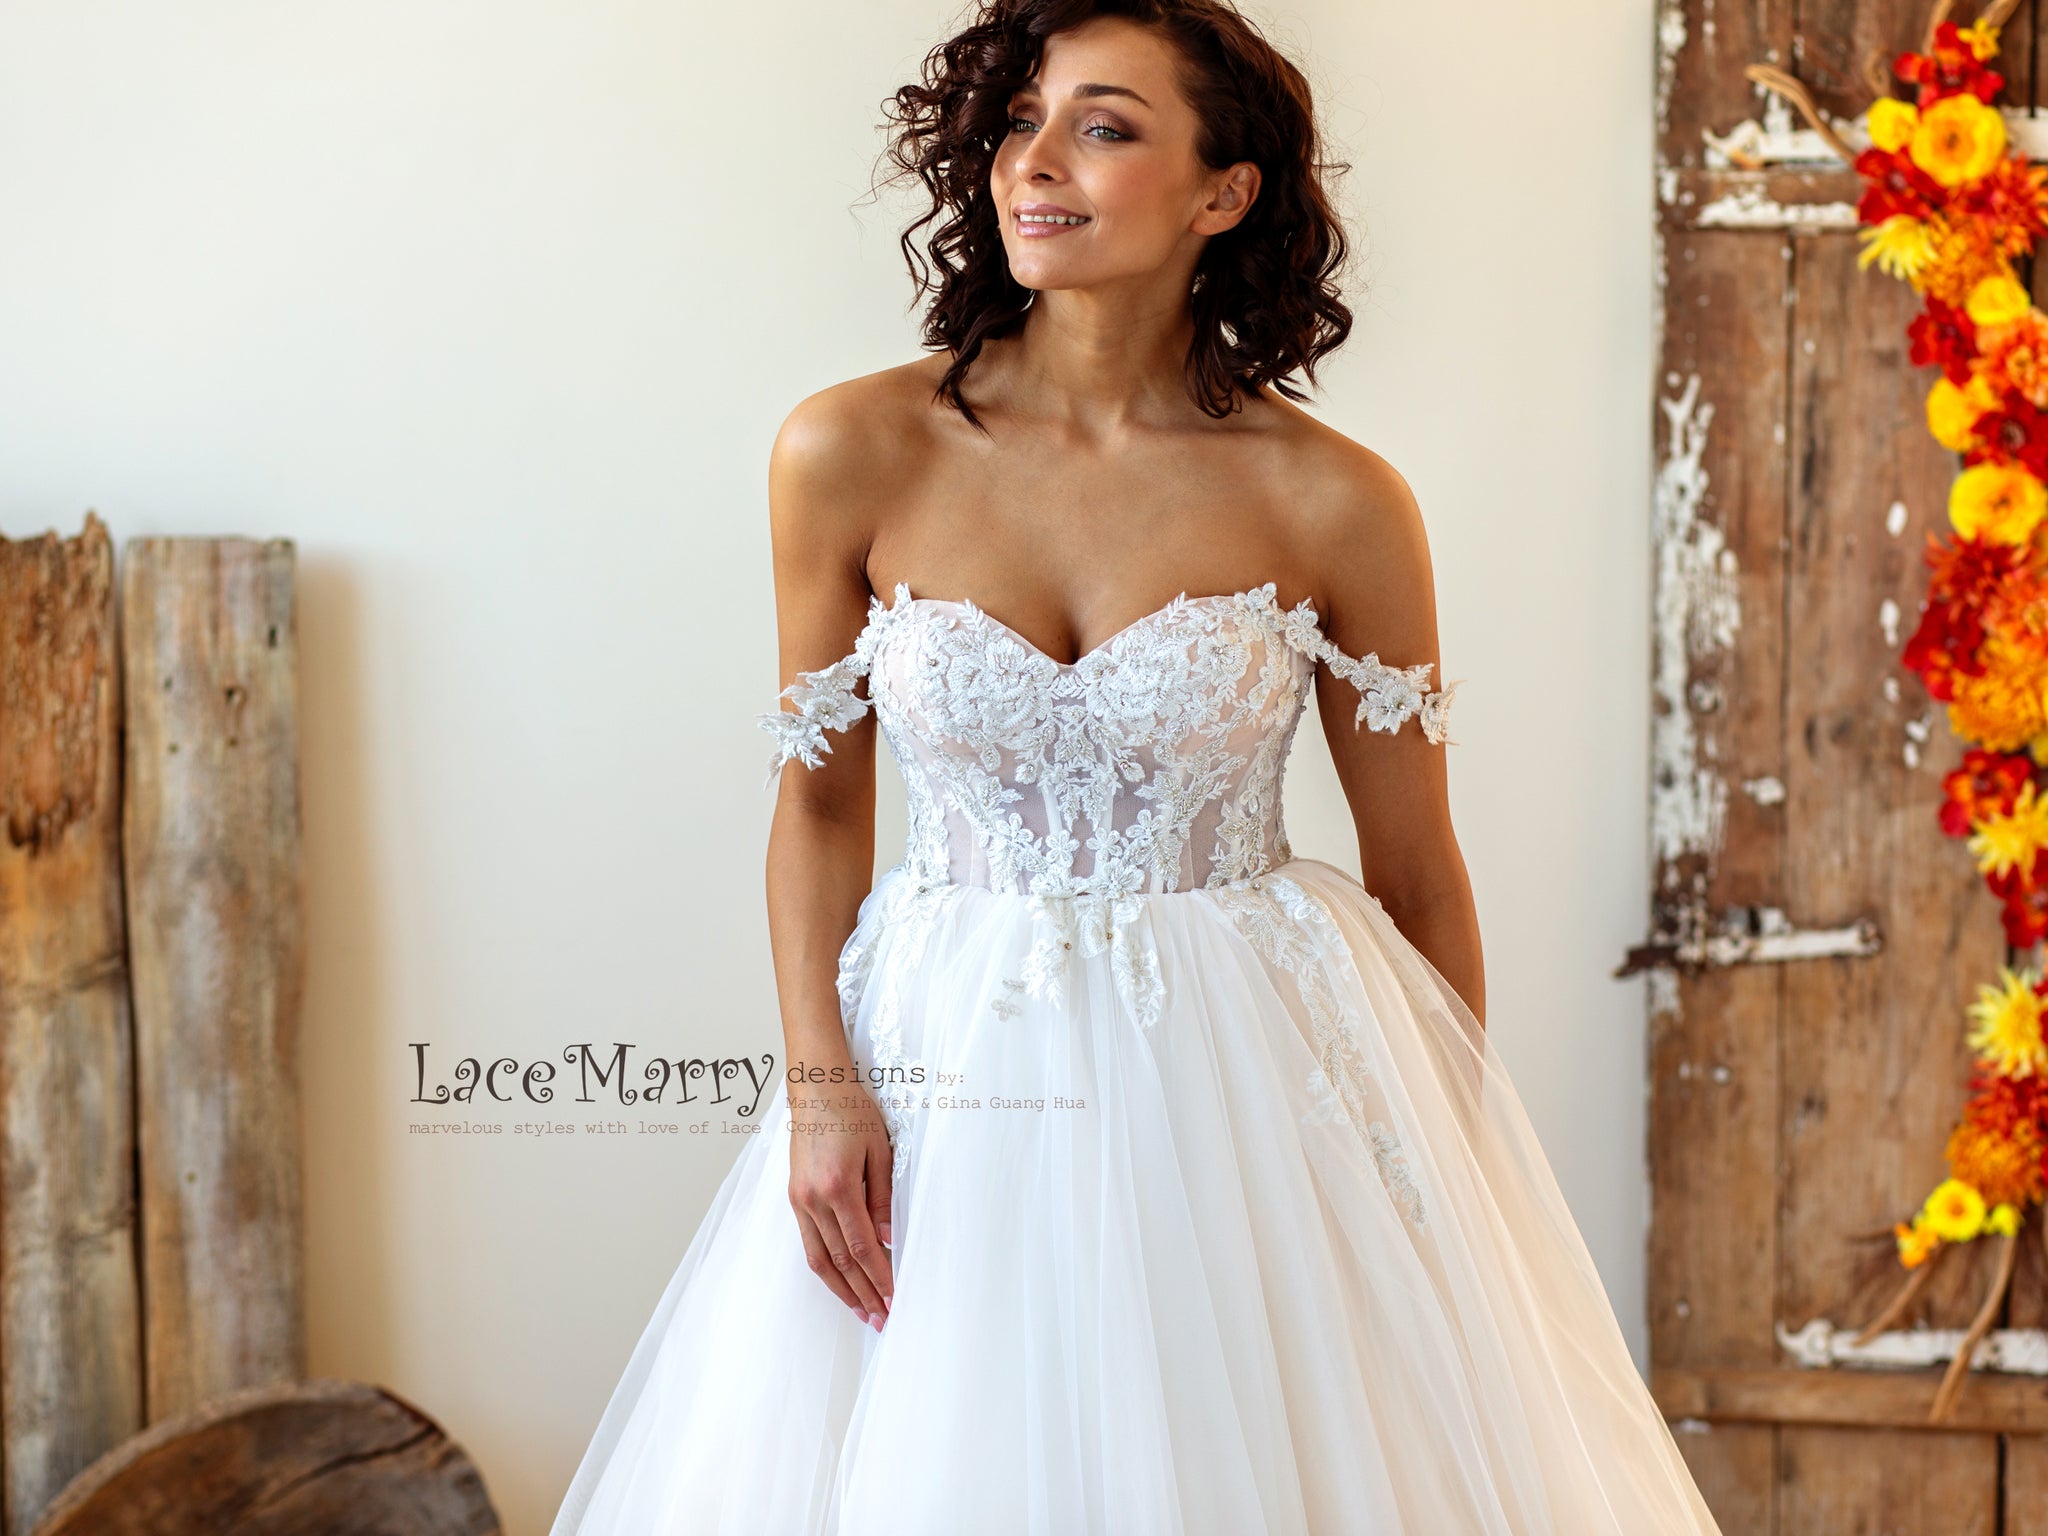 Off-shoulder Short Sleeves Lace Ball Gown Wedding Dress - VQ